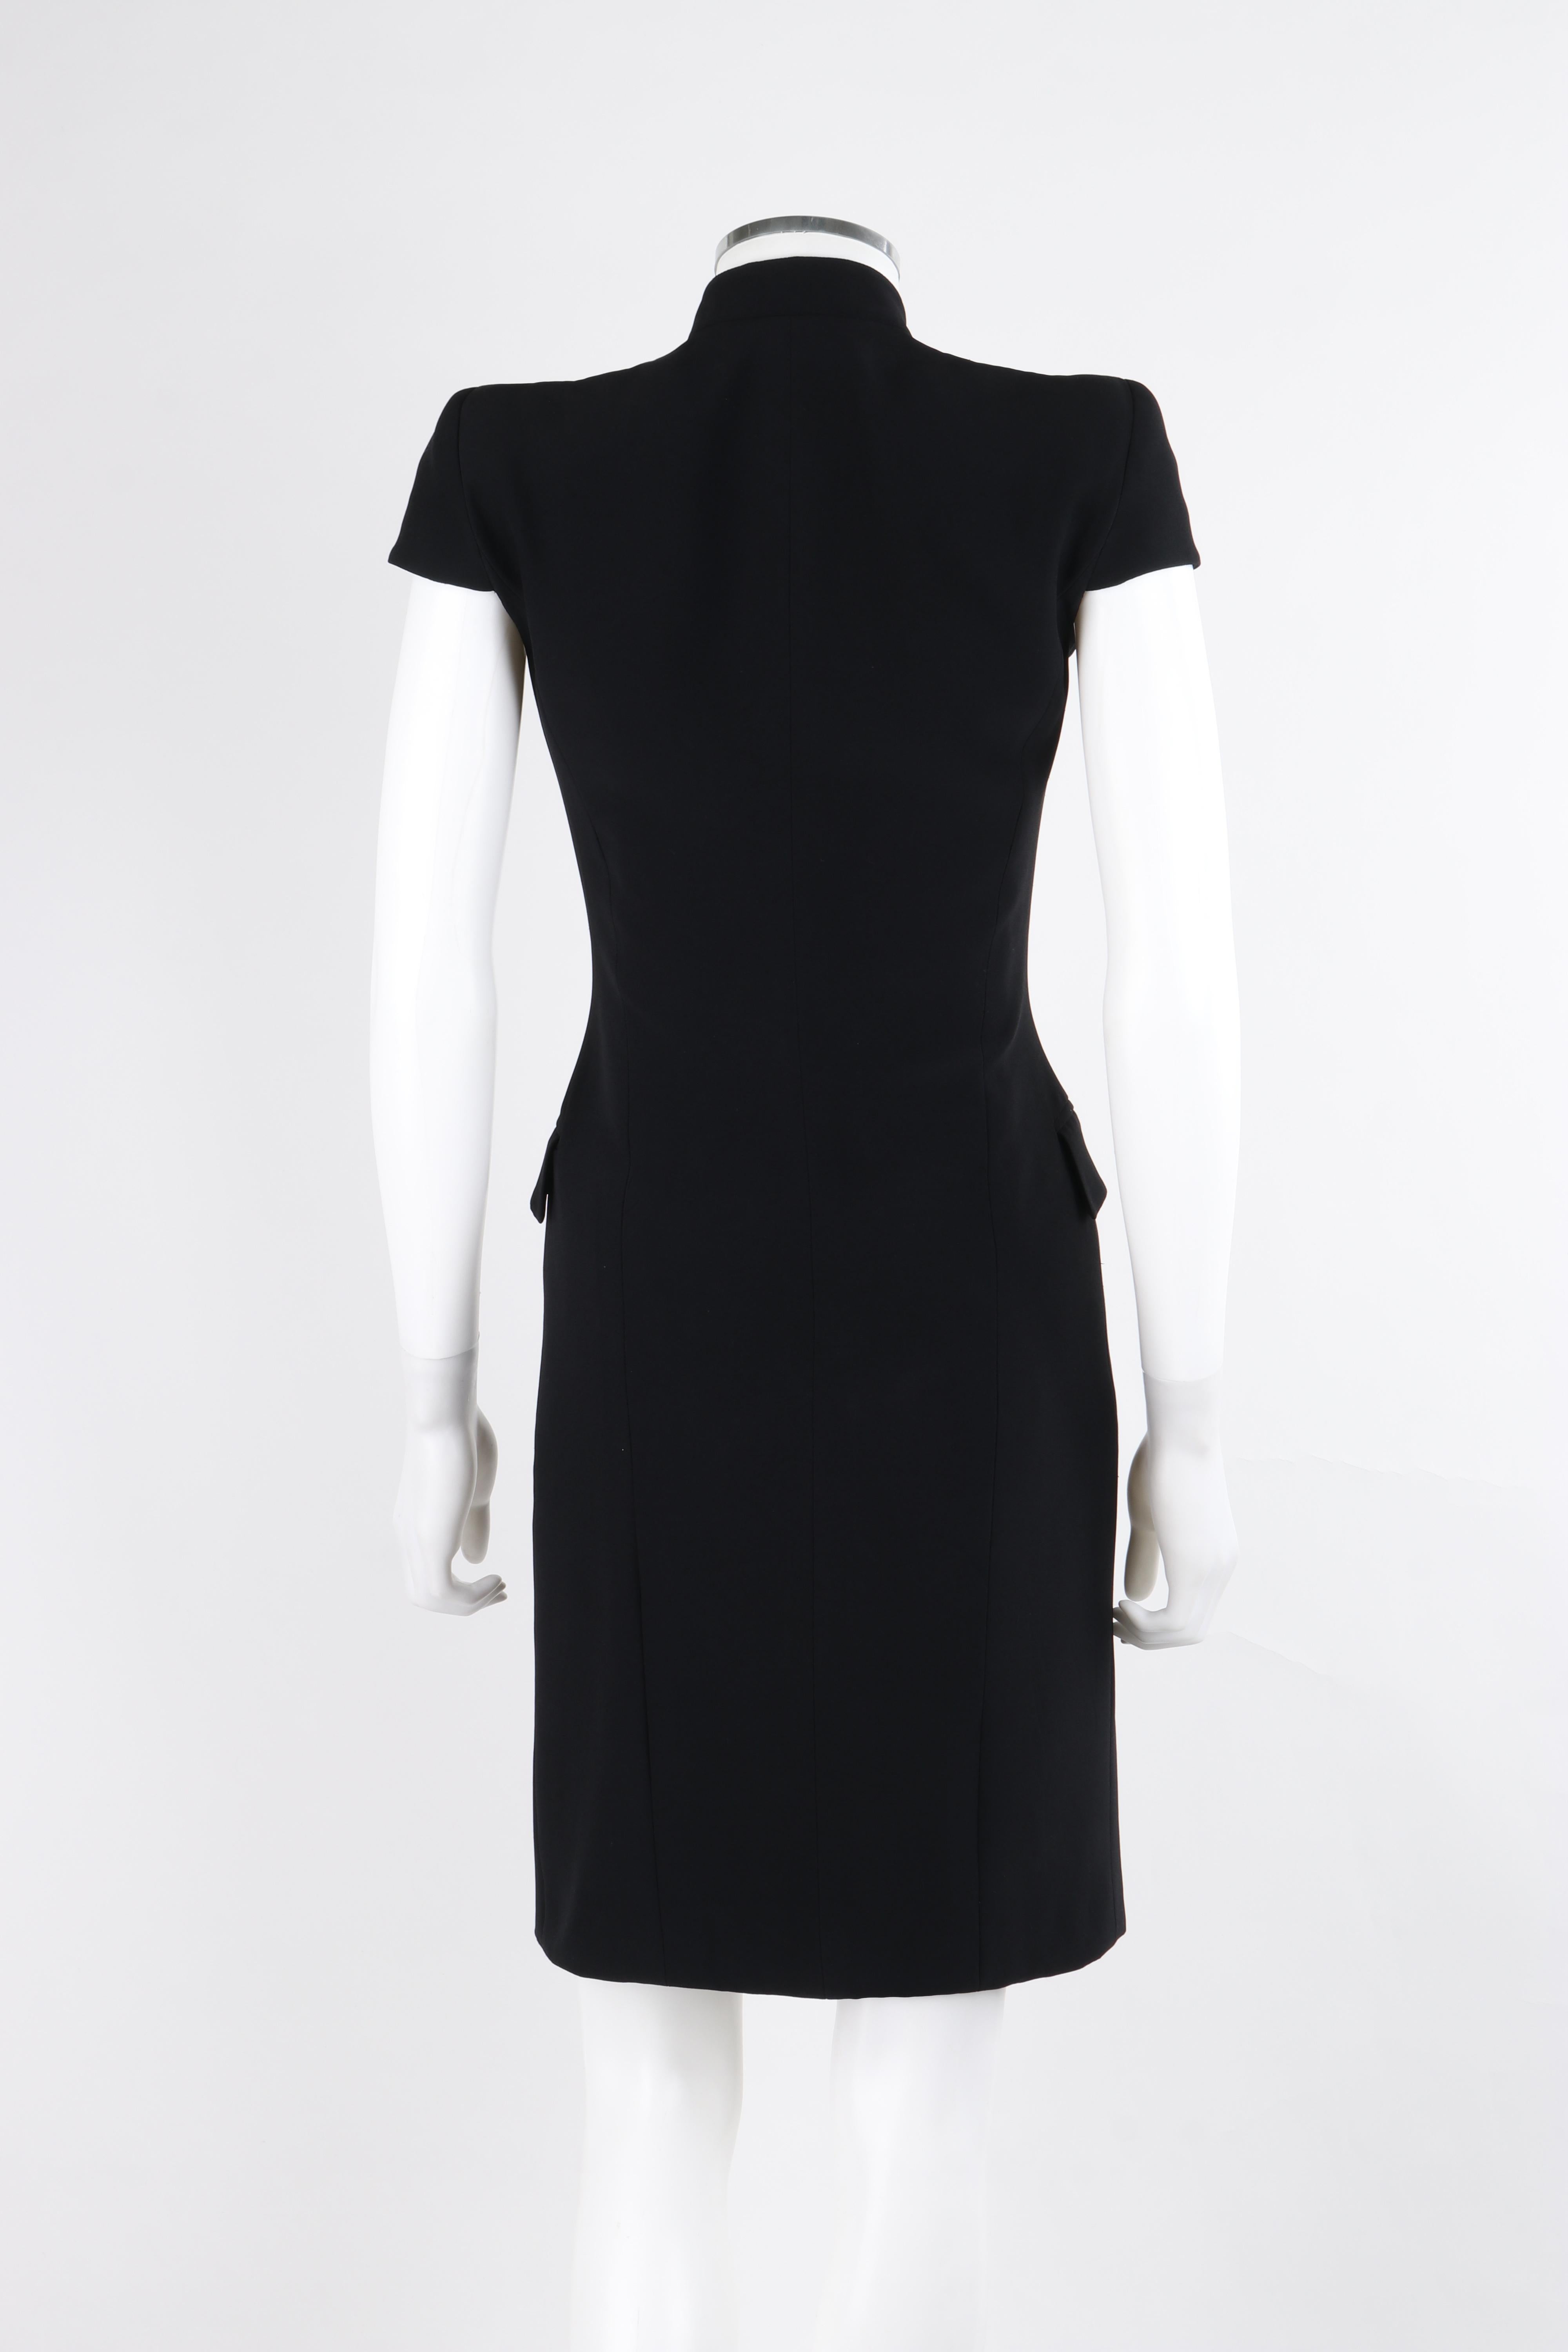 ALEXANDER McQUEEN c.2012 Black Double Breasted Button Up Collar Cocktail Dress For Sale 1